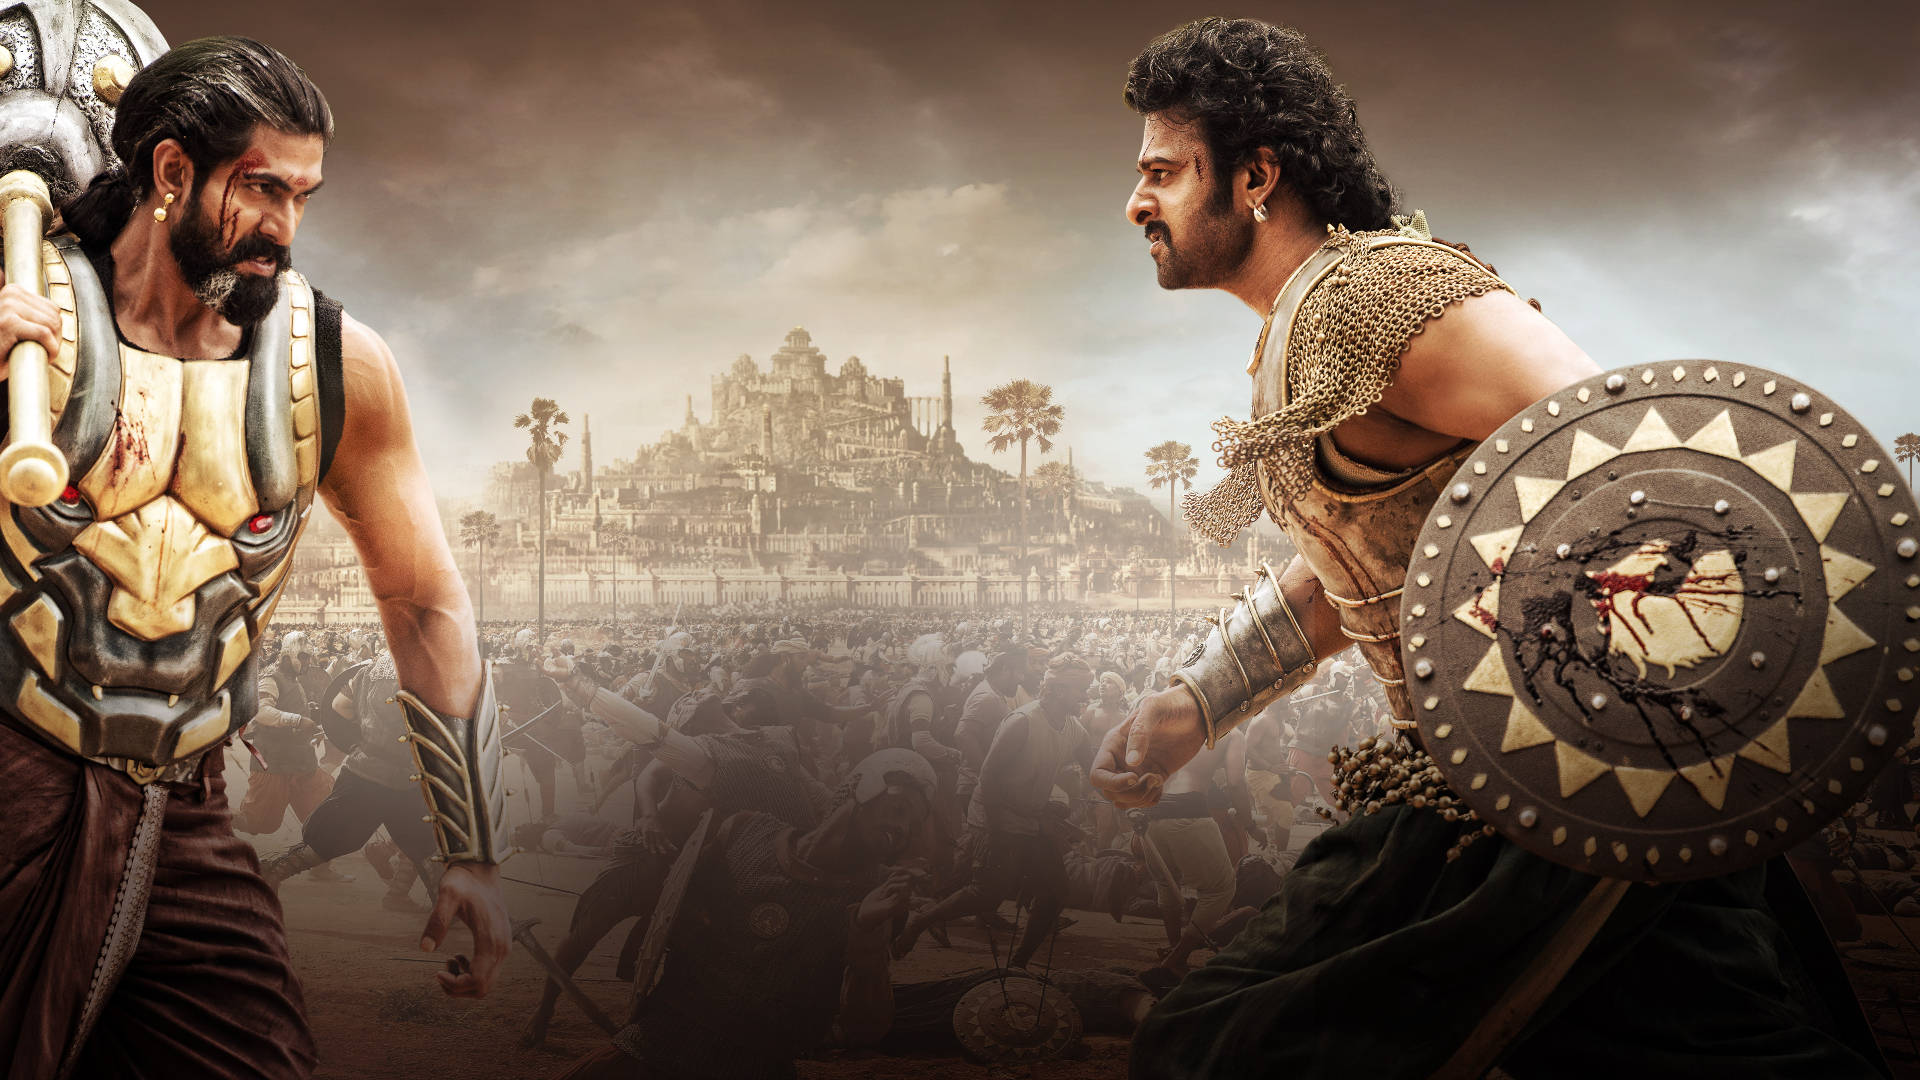 Prabhas Baahubali 2 The Conclusion Wallpaper by Sumanth0019 on DeviantArt